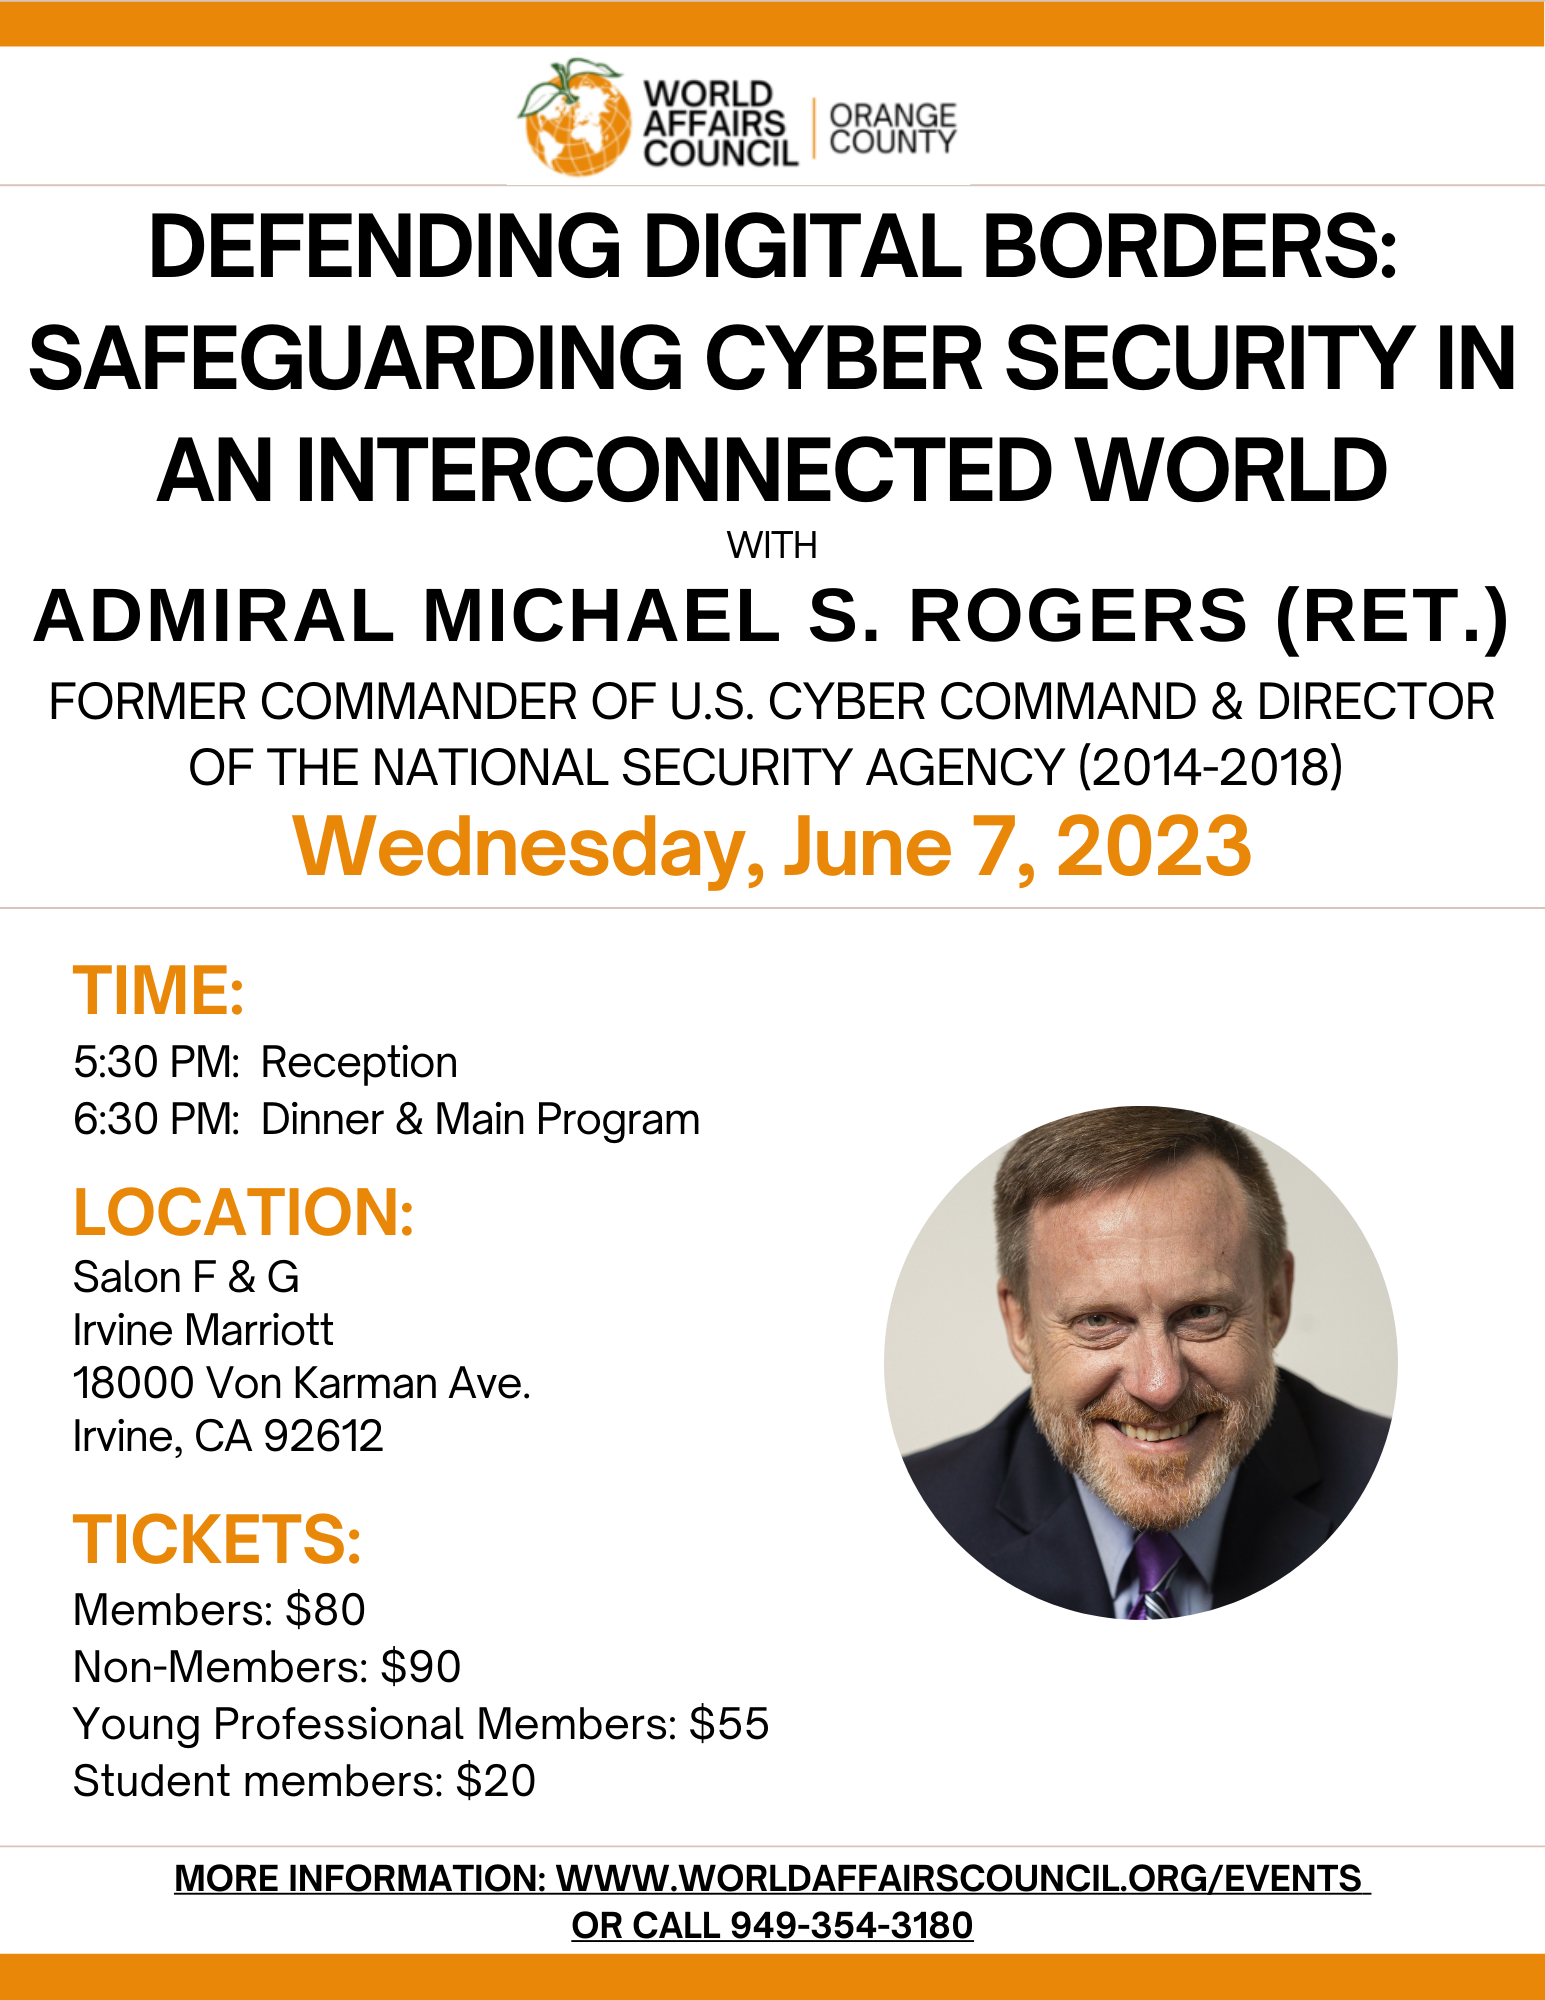 "Defending Digital Borders" with Admiral Michael S. Rogers (ret.), Commander of U.S. Cyber Command & Director of the NSA